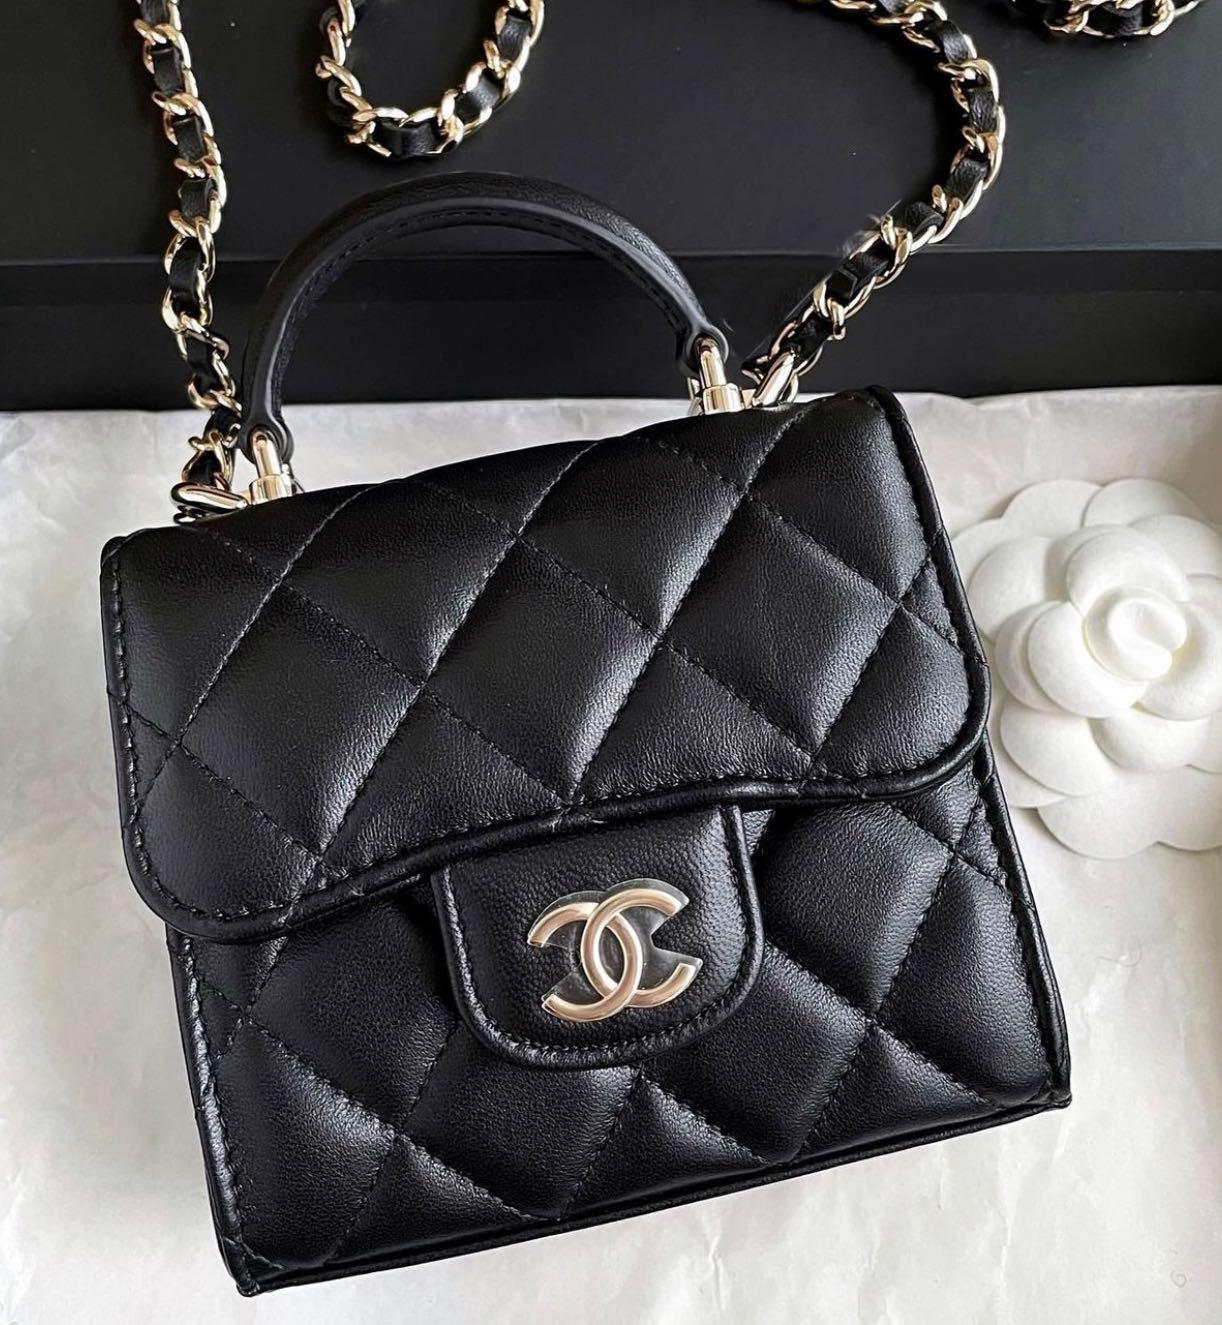 🆕 AUTHENTIC CHANEL 22A MINI BAG WITH TOP HANDLE BLACK LAMBSKIN IN GOLD  HARDWARE